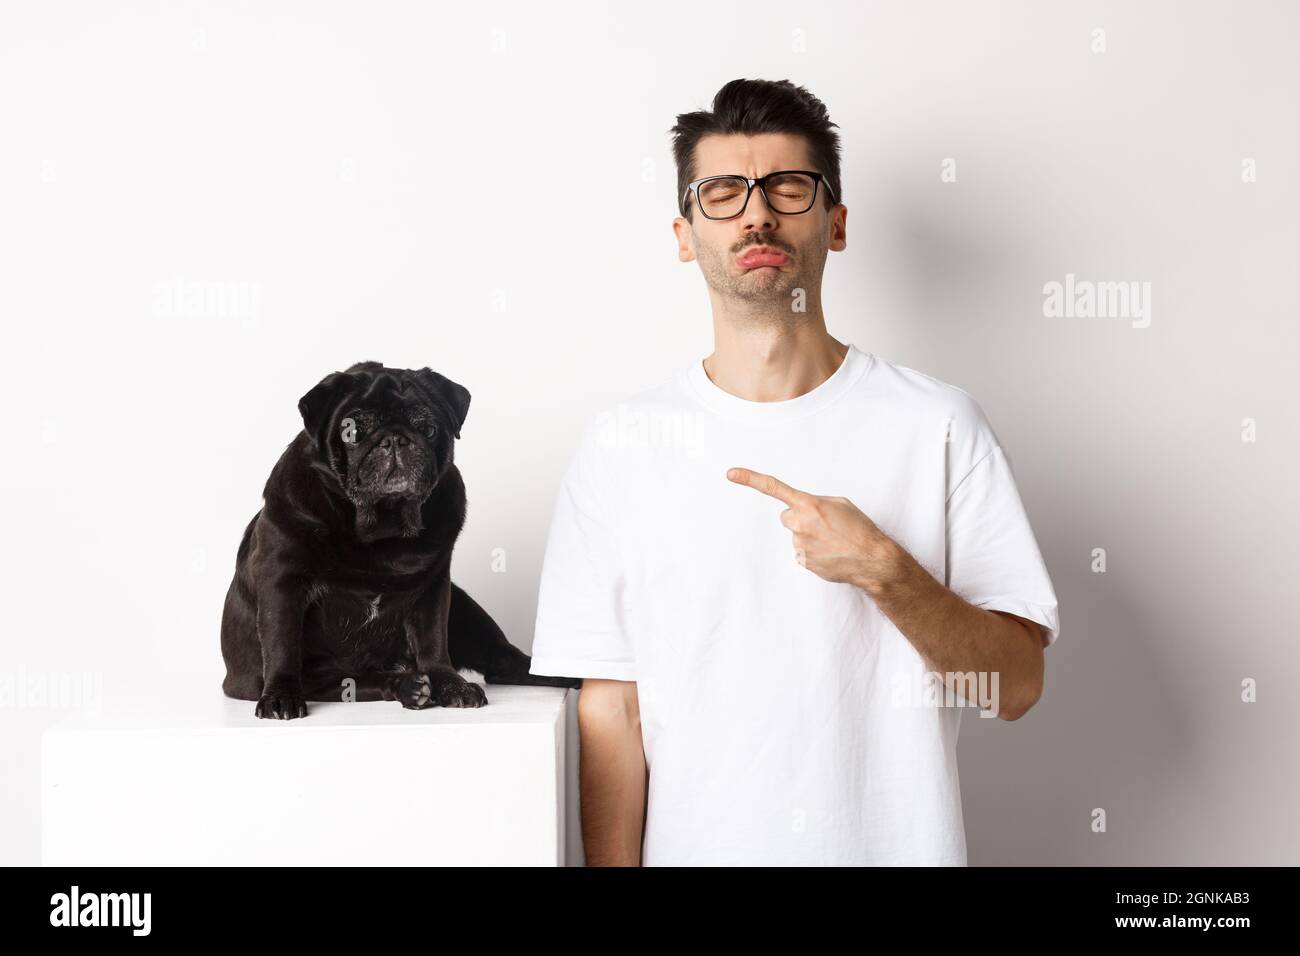 Sad and gloomy pet owner pointing at his black pug dog and sobbing, standing upster against white background Stock Photo